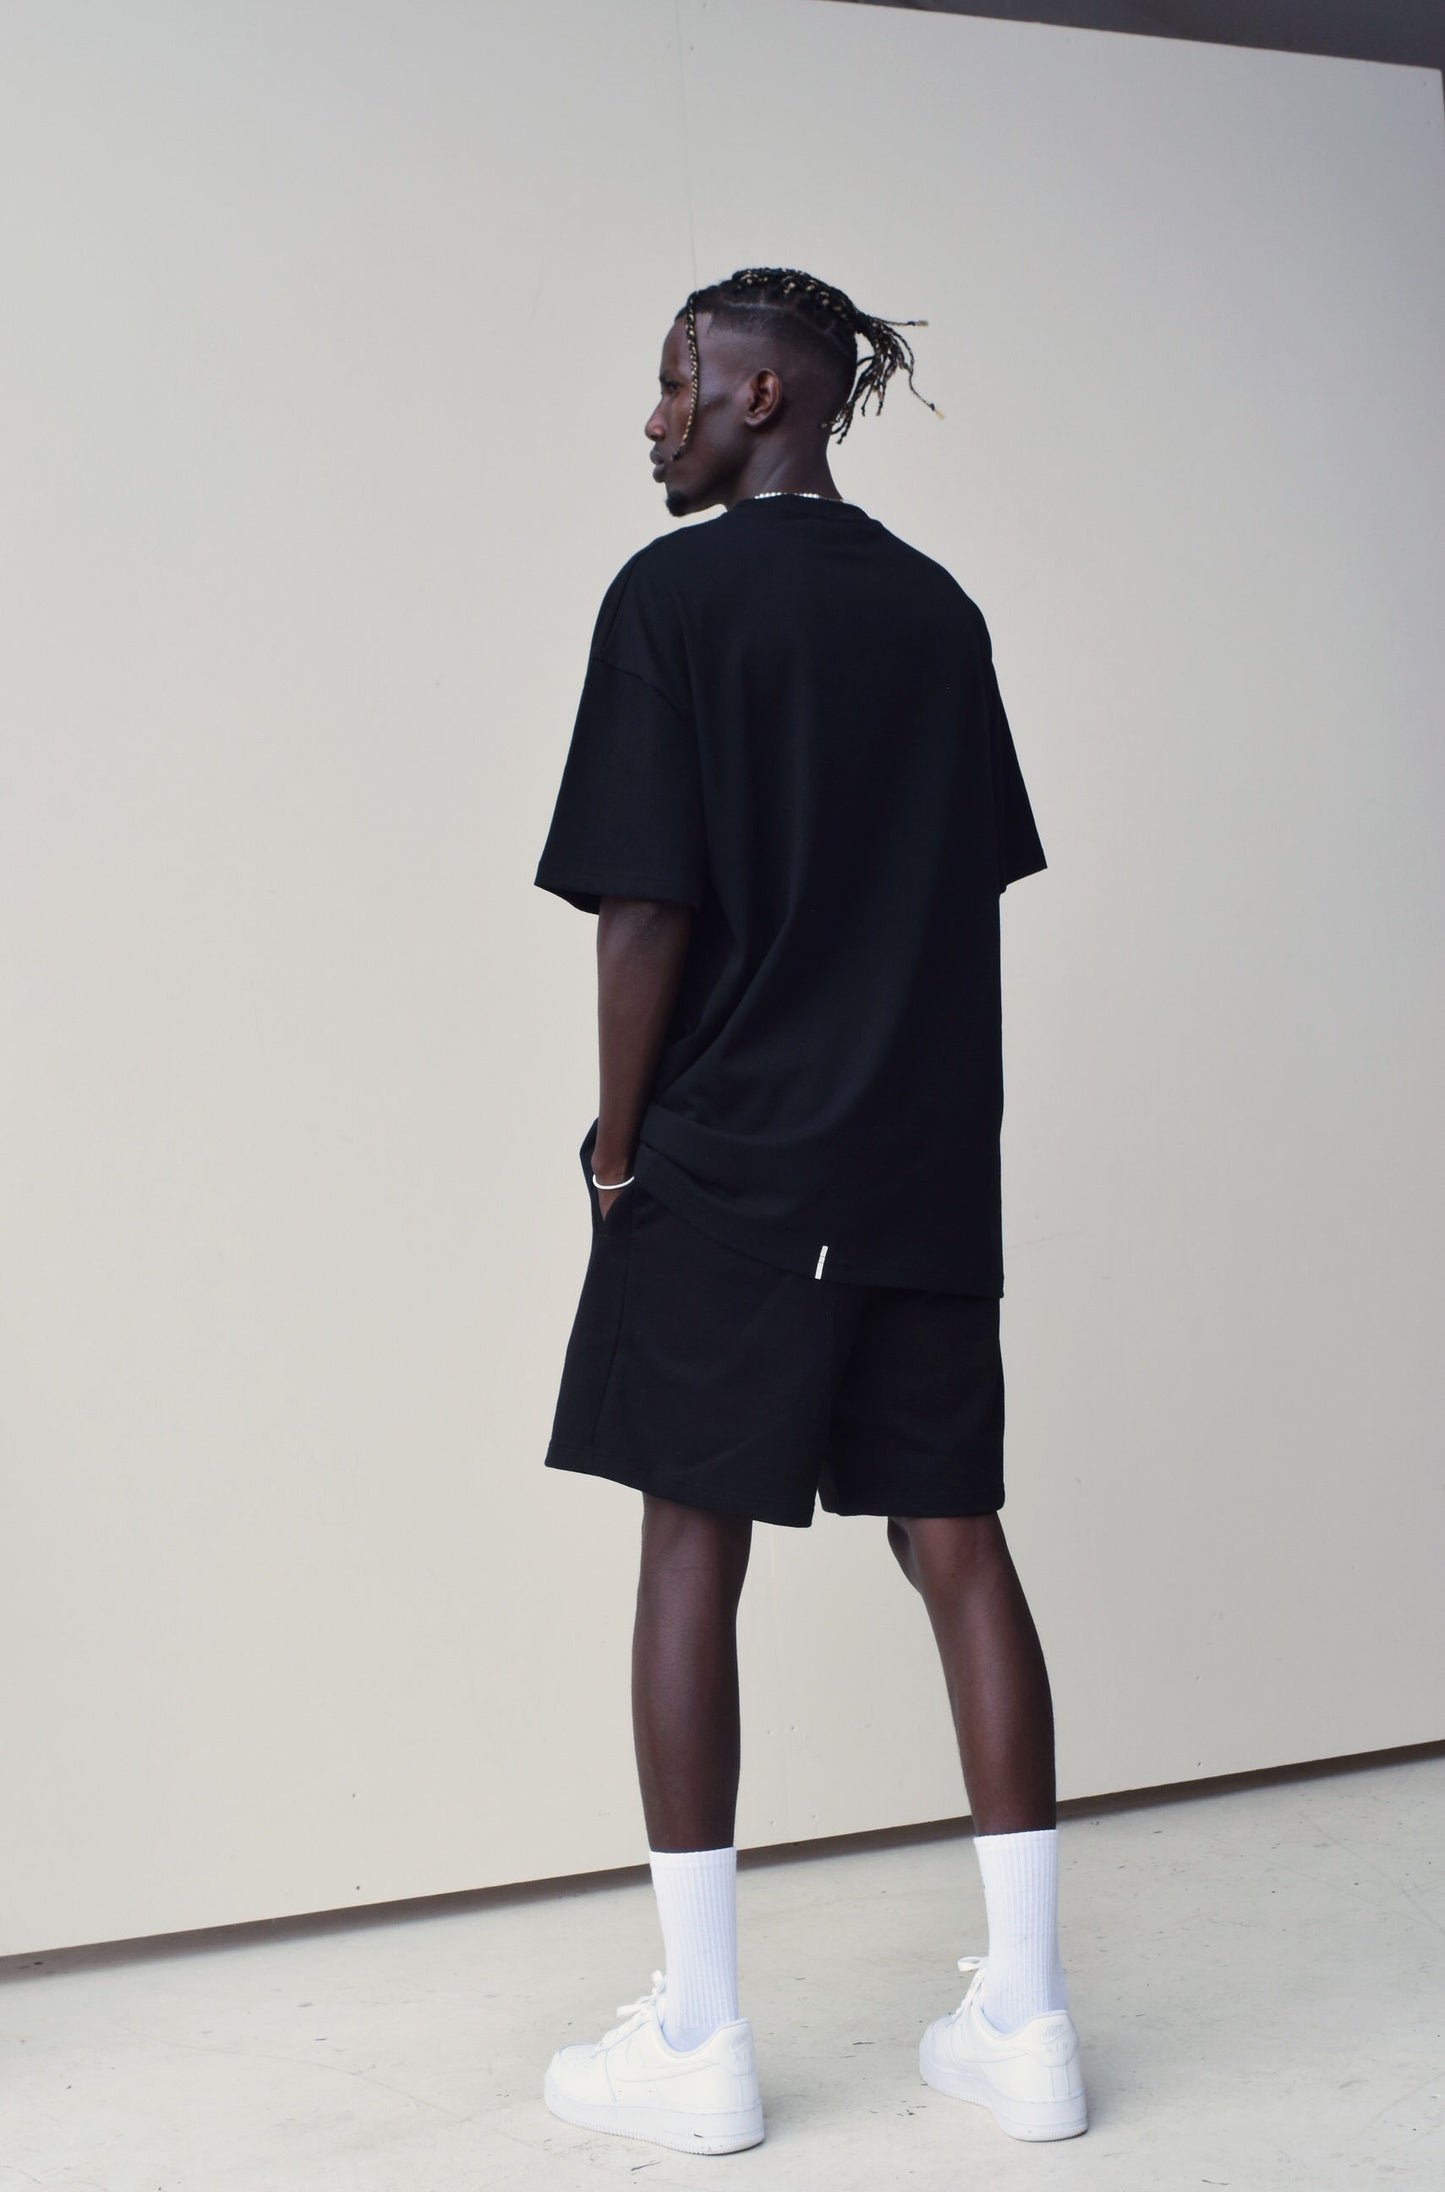 Male model wearing a Black oversize Tshirt with round brand design